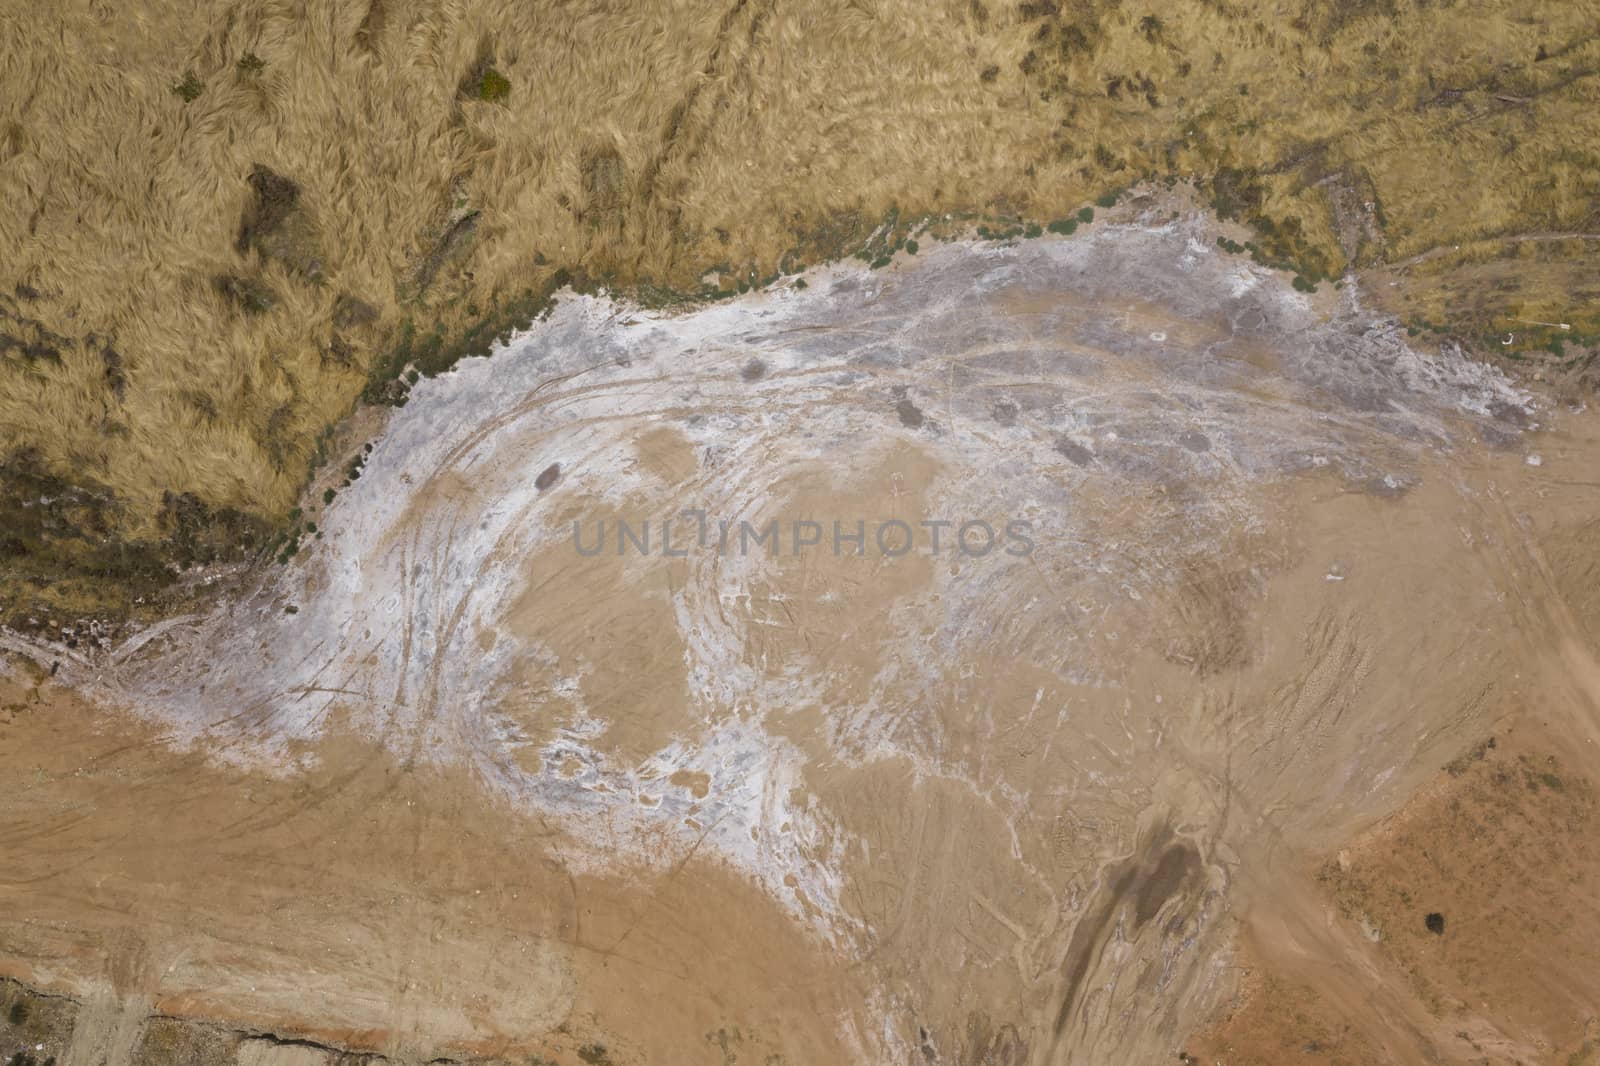 Aerial view of sand patterns in a dry river bed by WittkePhotos